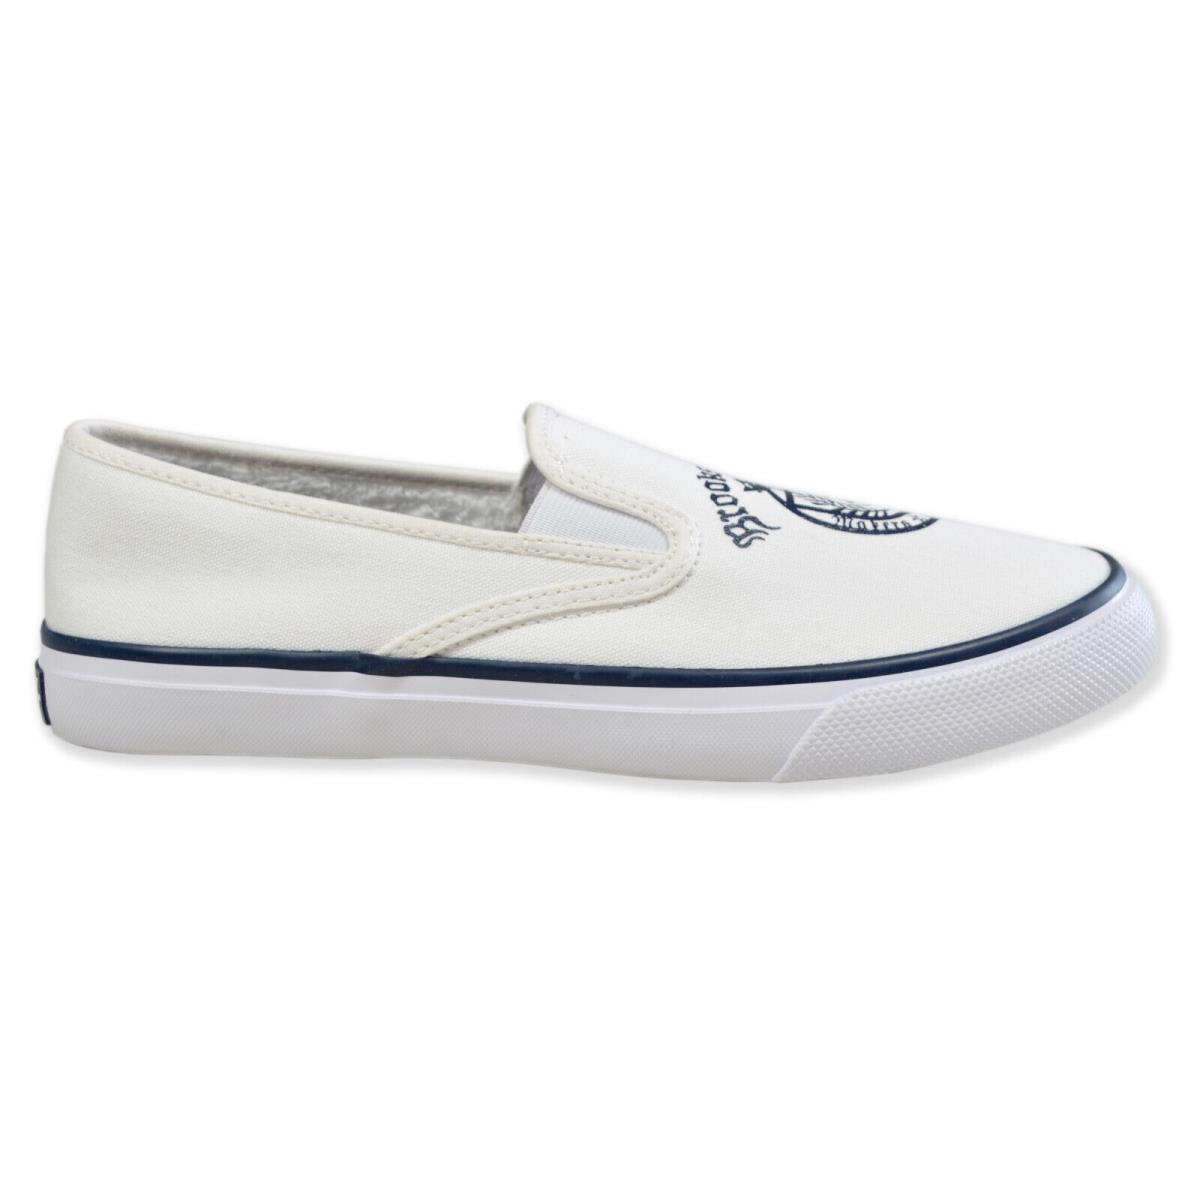 Brooks Brothers Sperry White Navy Crest Canvas Slip On Sneakers 10.5 M 8415-9